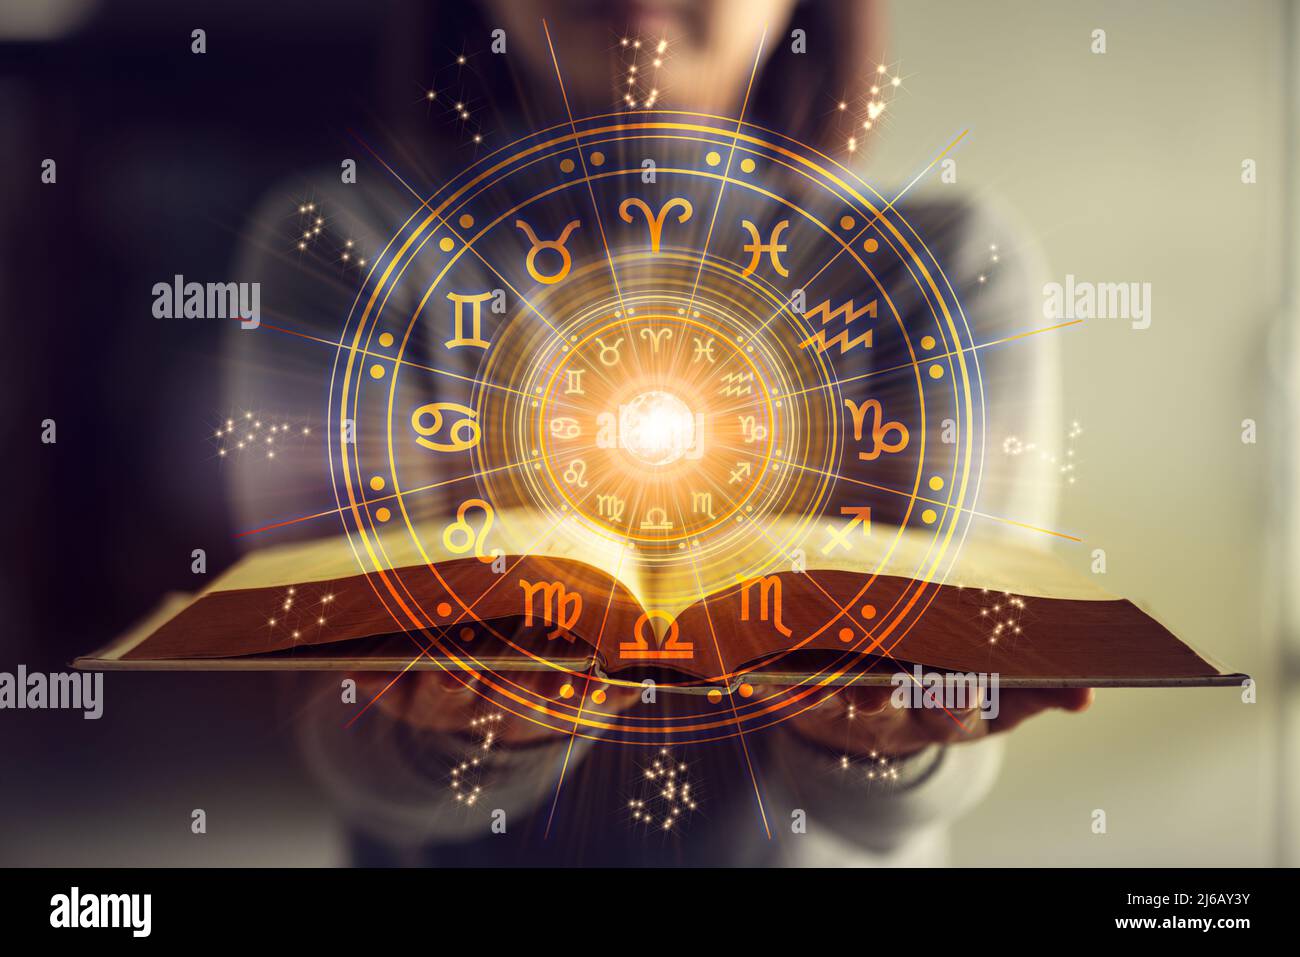 Woman holding a astrology book. Astrological wheel projection, choose a zodiac sign. Astrology esoteric concept. Stock Photo